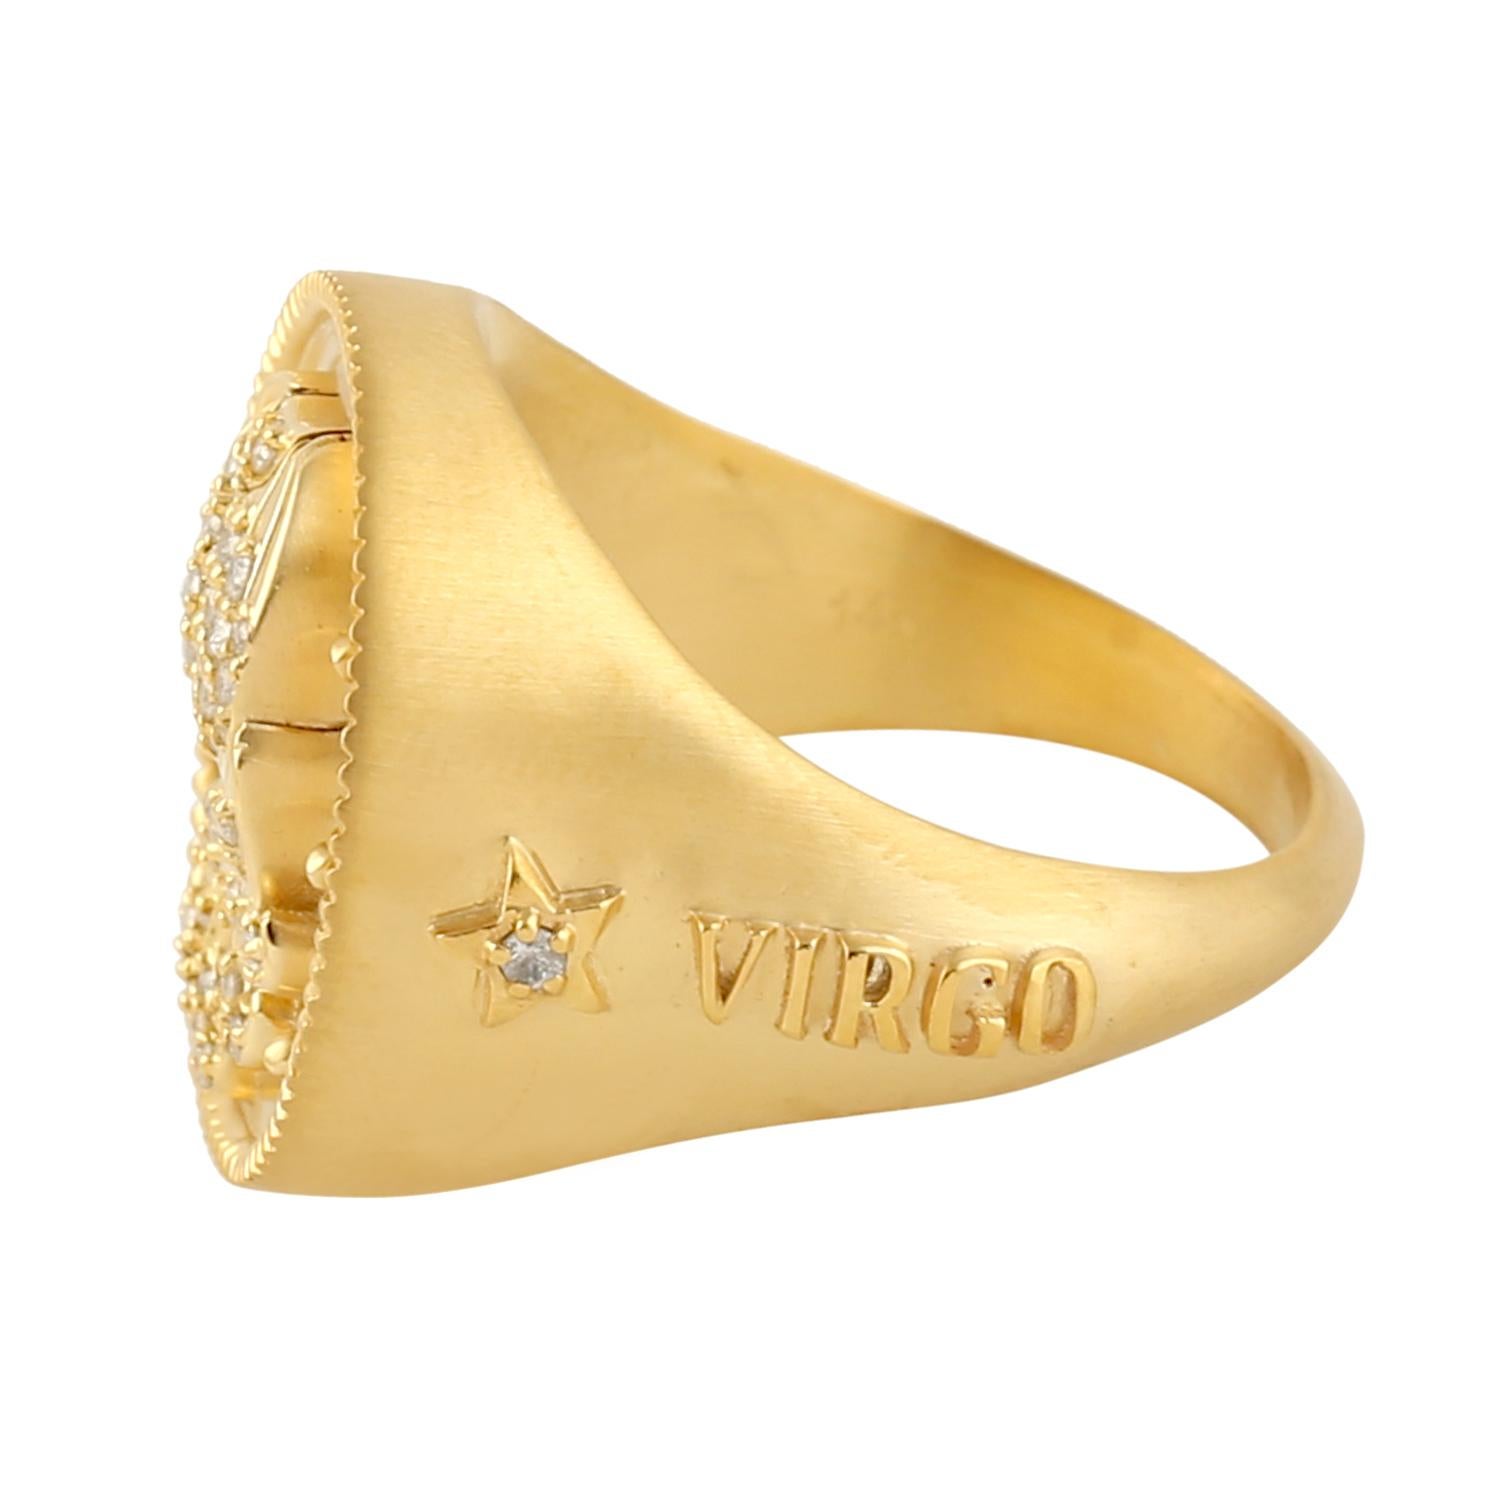 Mixed Cut 14k Golden Ring With Pave Diamong Setting In Swirl Virgo Zodiac Sunsign For Sale